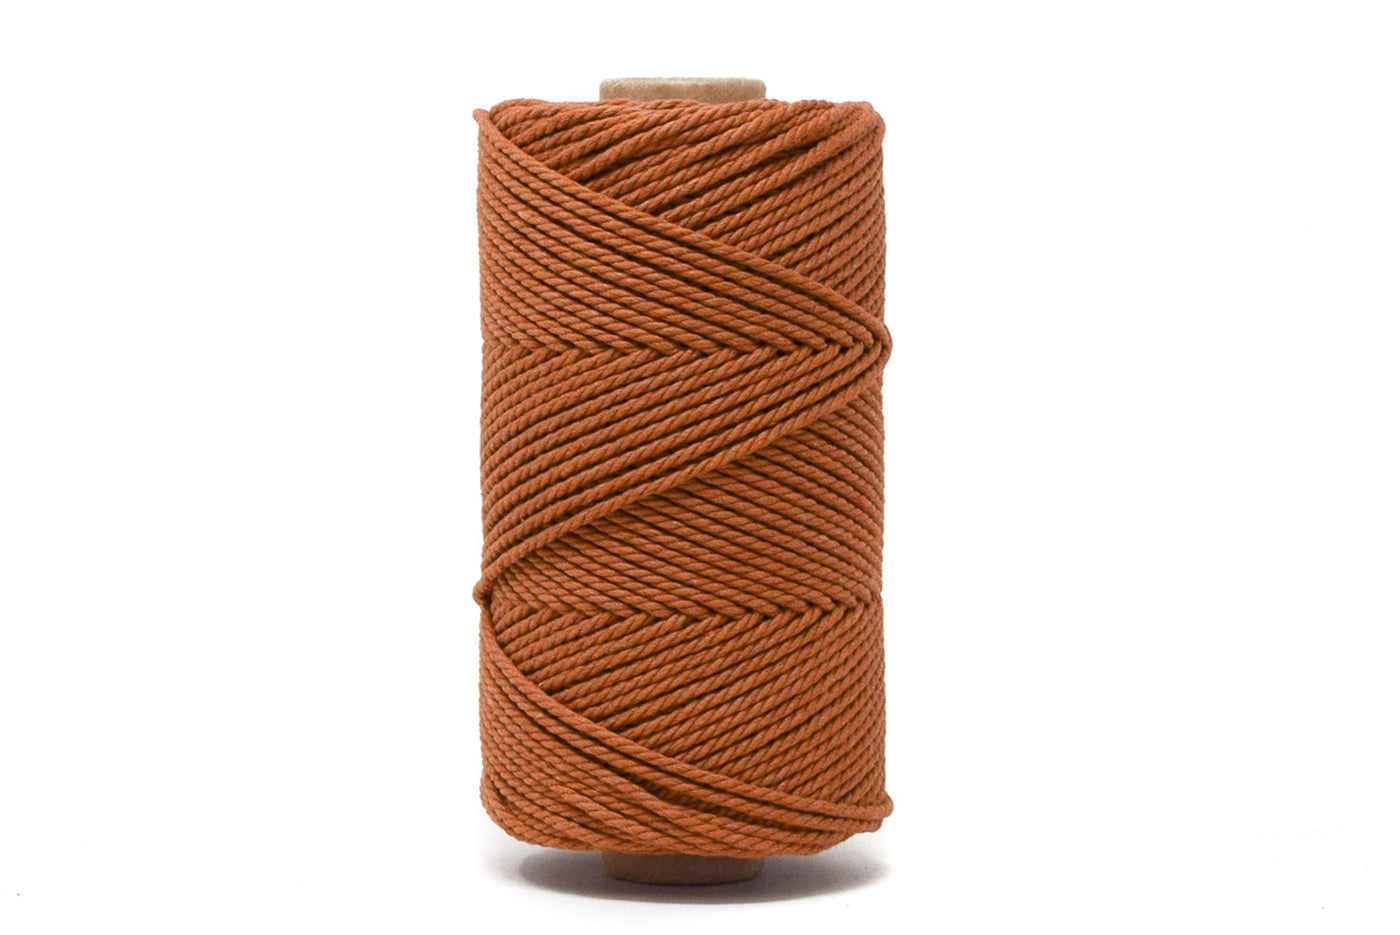 COTTON ROPE ZERO WASTE 2 MM - 3 PLY - ARLES COLOR